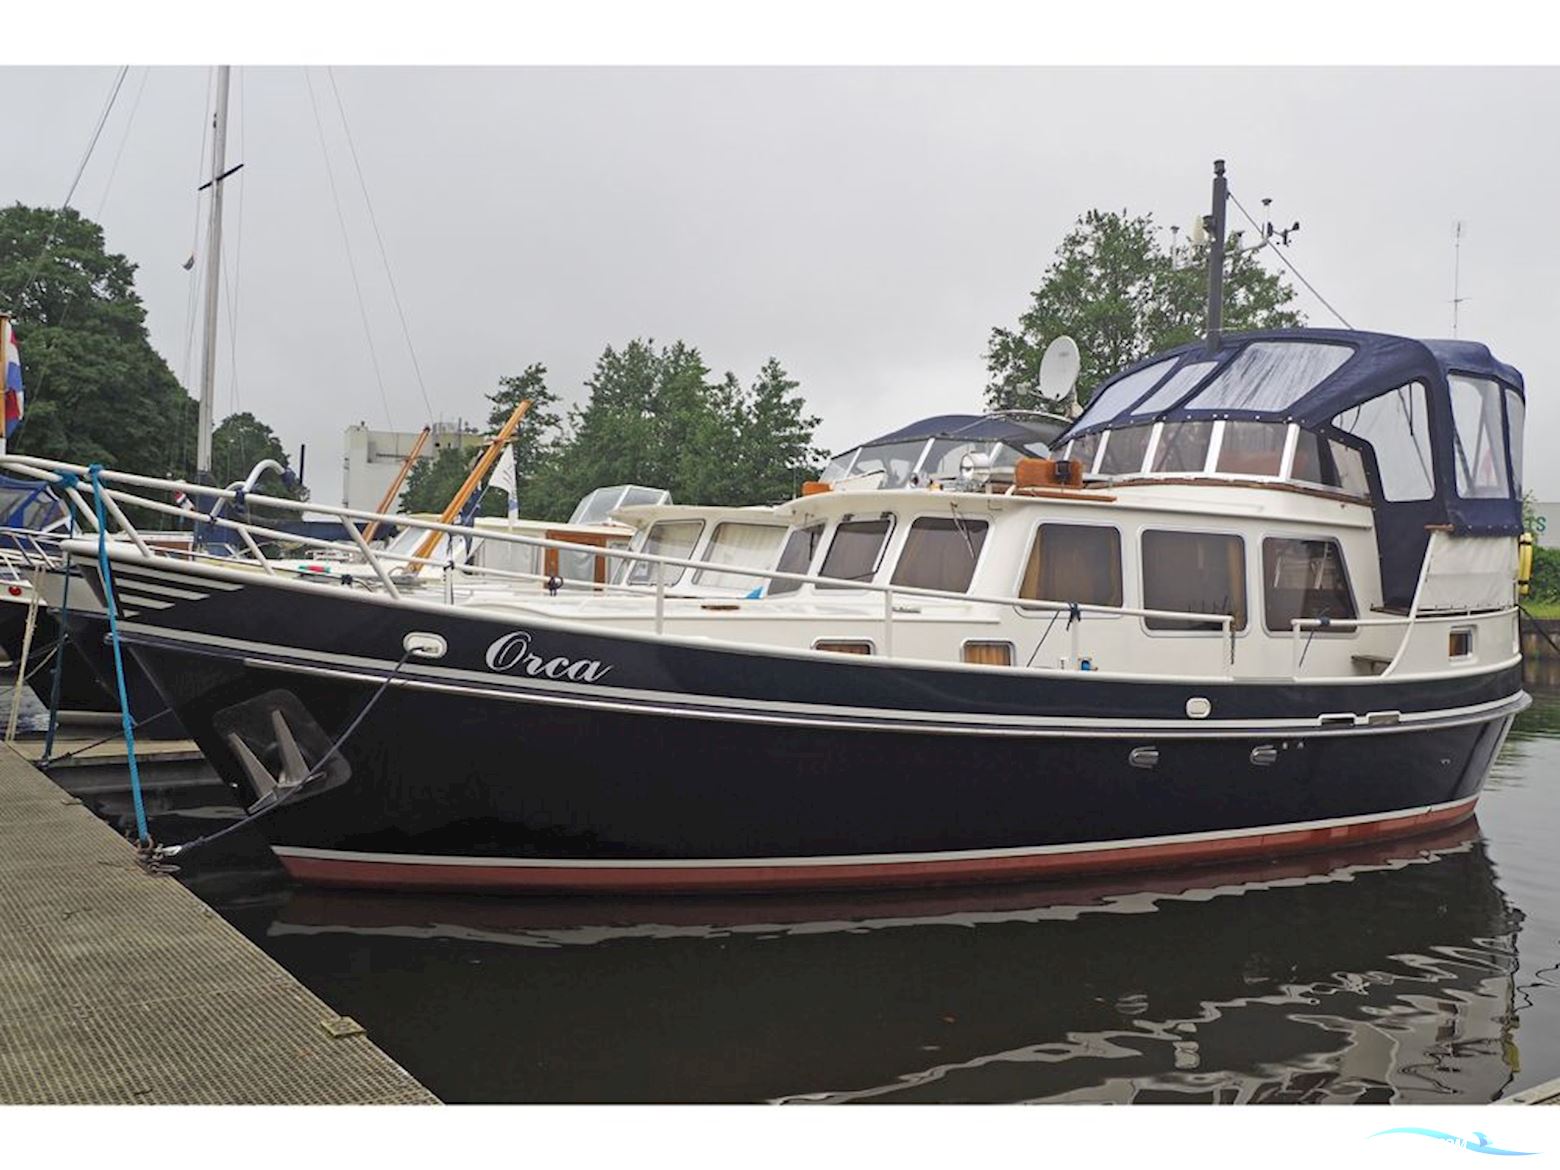 Groeneveld Kotter 1100 AK Motor boat 1992, with Volvo engine, The Netherlands